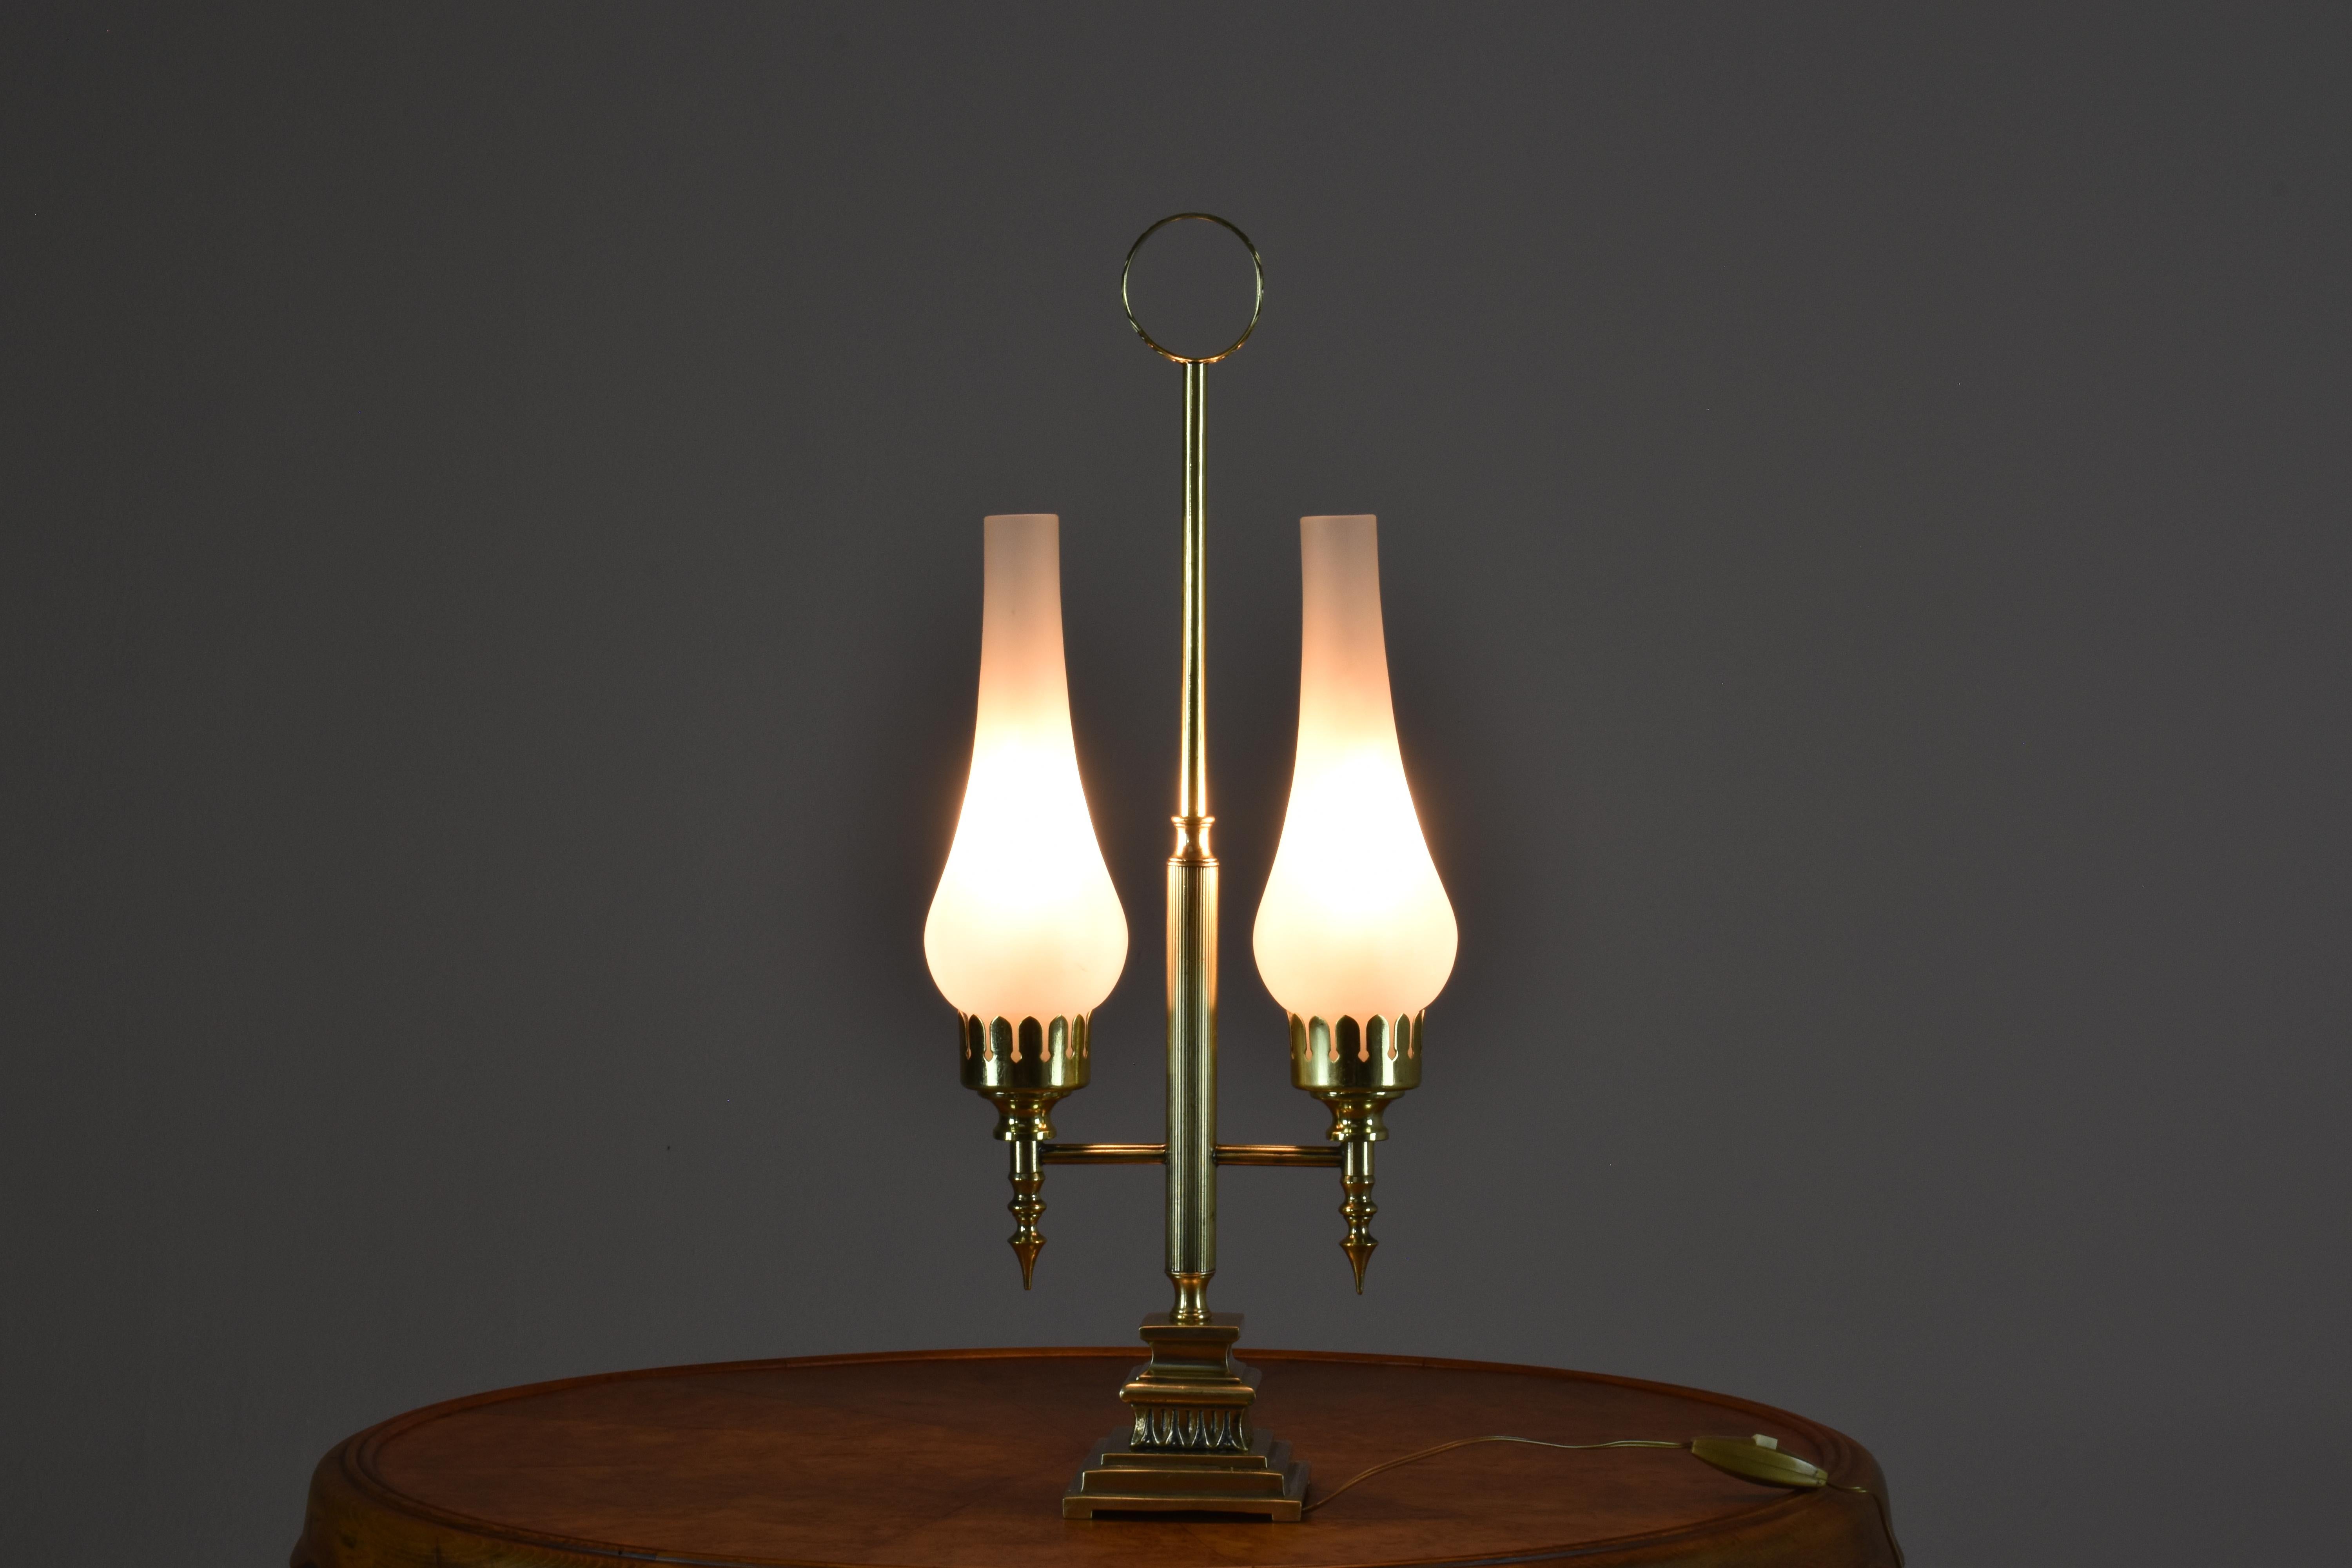  A 1960s Italian lamp that features two sanded glass shades. The intricate brass structure in the centre is characterised by classic and ornamental Art Deco designs. It has elegant and geometric shapes, rich materials, and intricate detailing. The